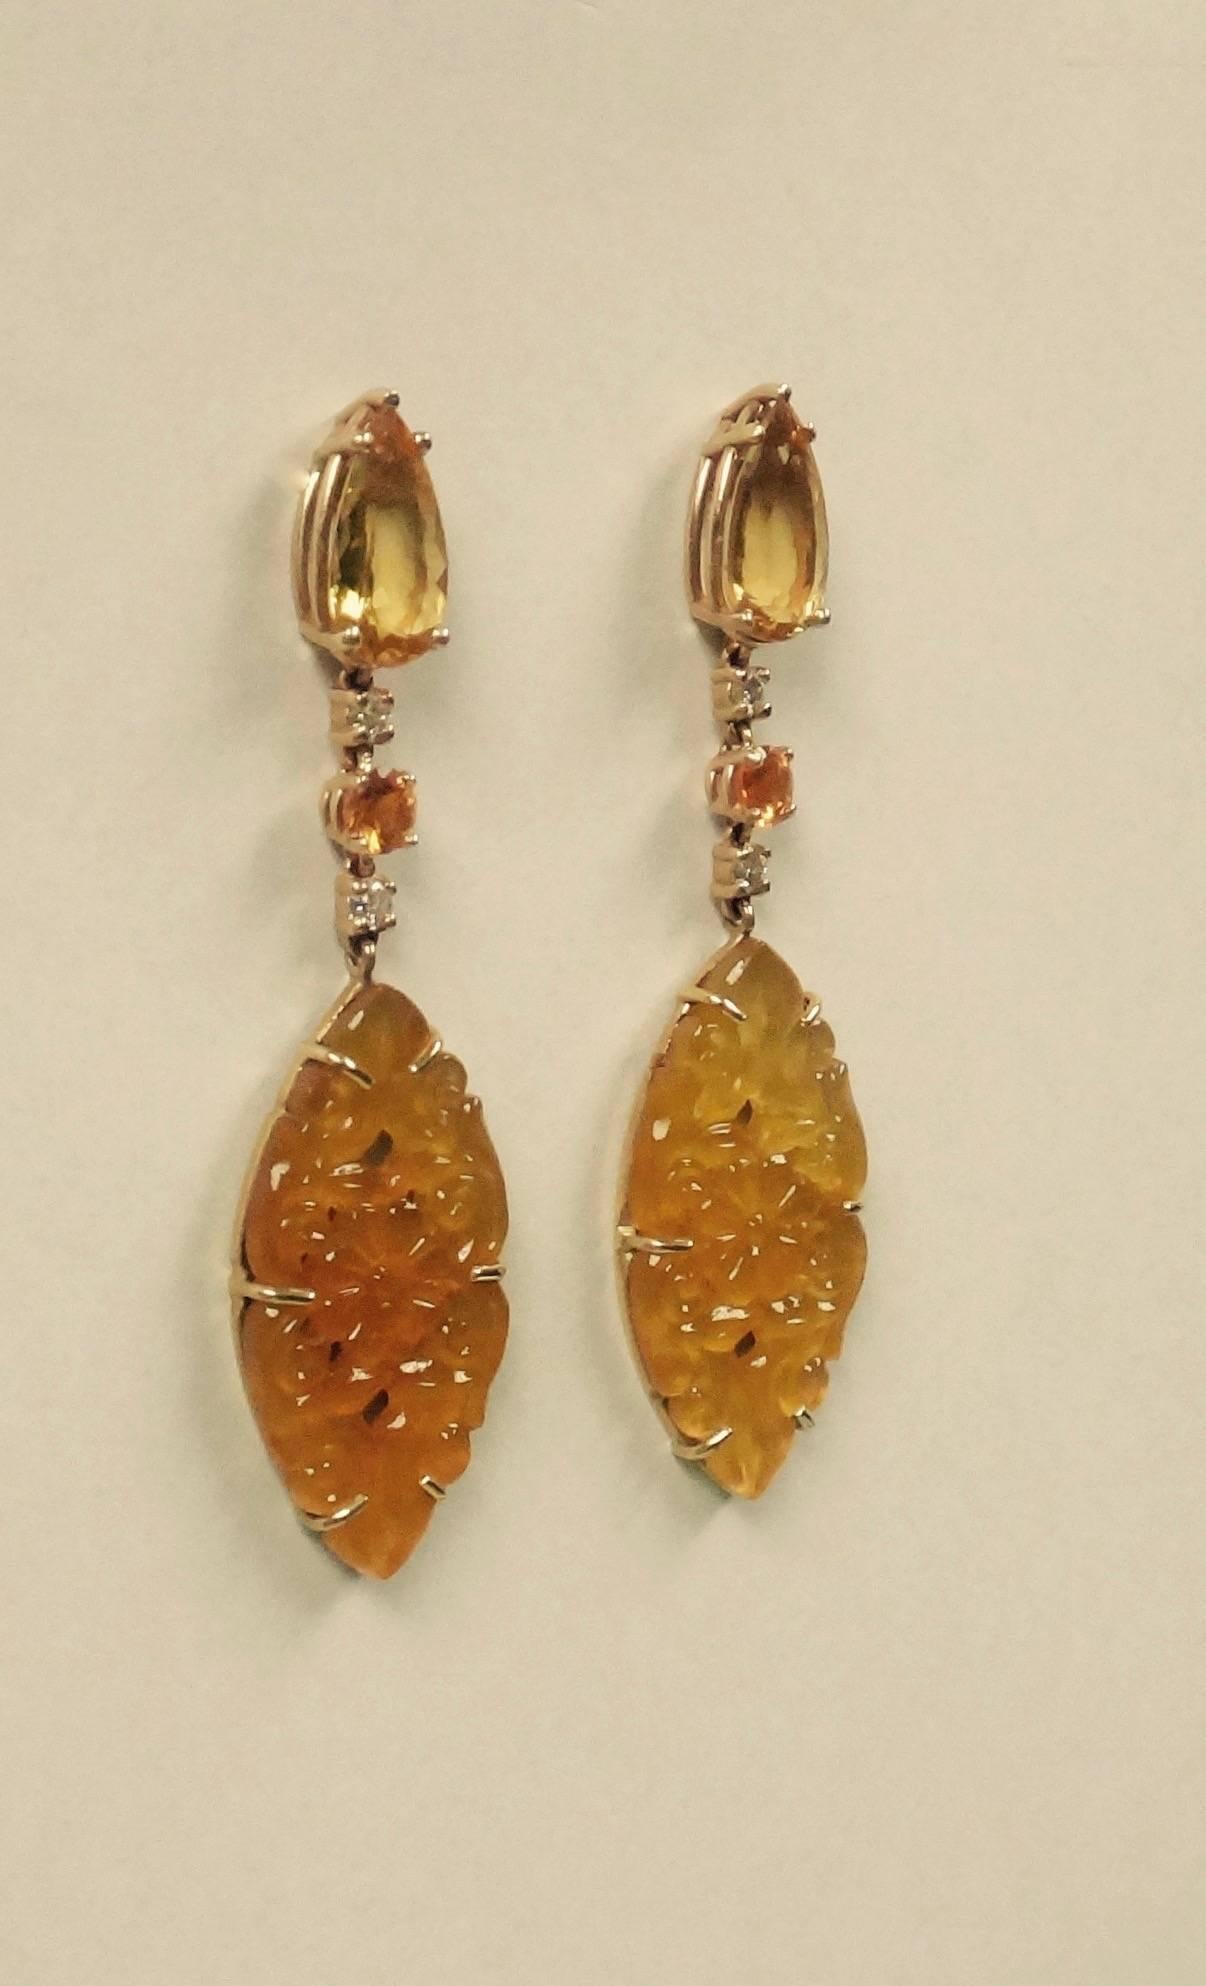 Dramatic dangle earrings consisting of pear shaped golden beryls, brilliant cut diamonds, bright yellow sapphires and exceptionally carved yellow onyx navettes.  All set in 18k yellow gold.  The navettes have been backed in 24k yellow gold to